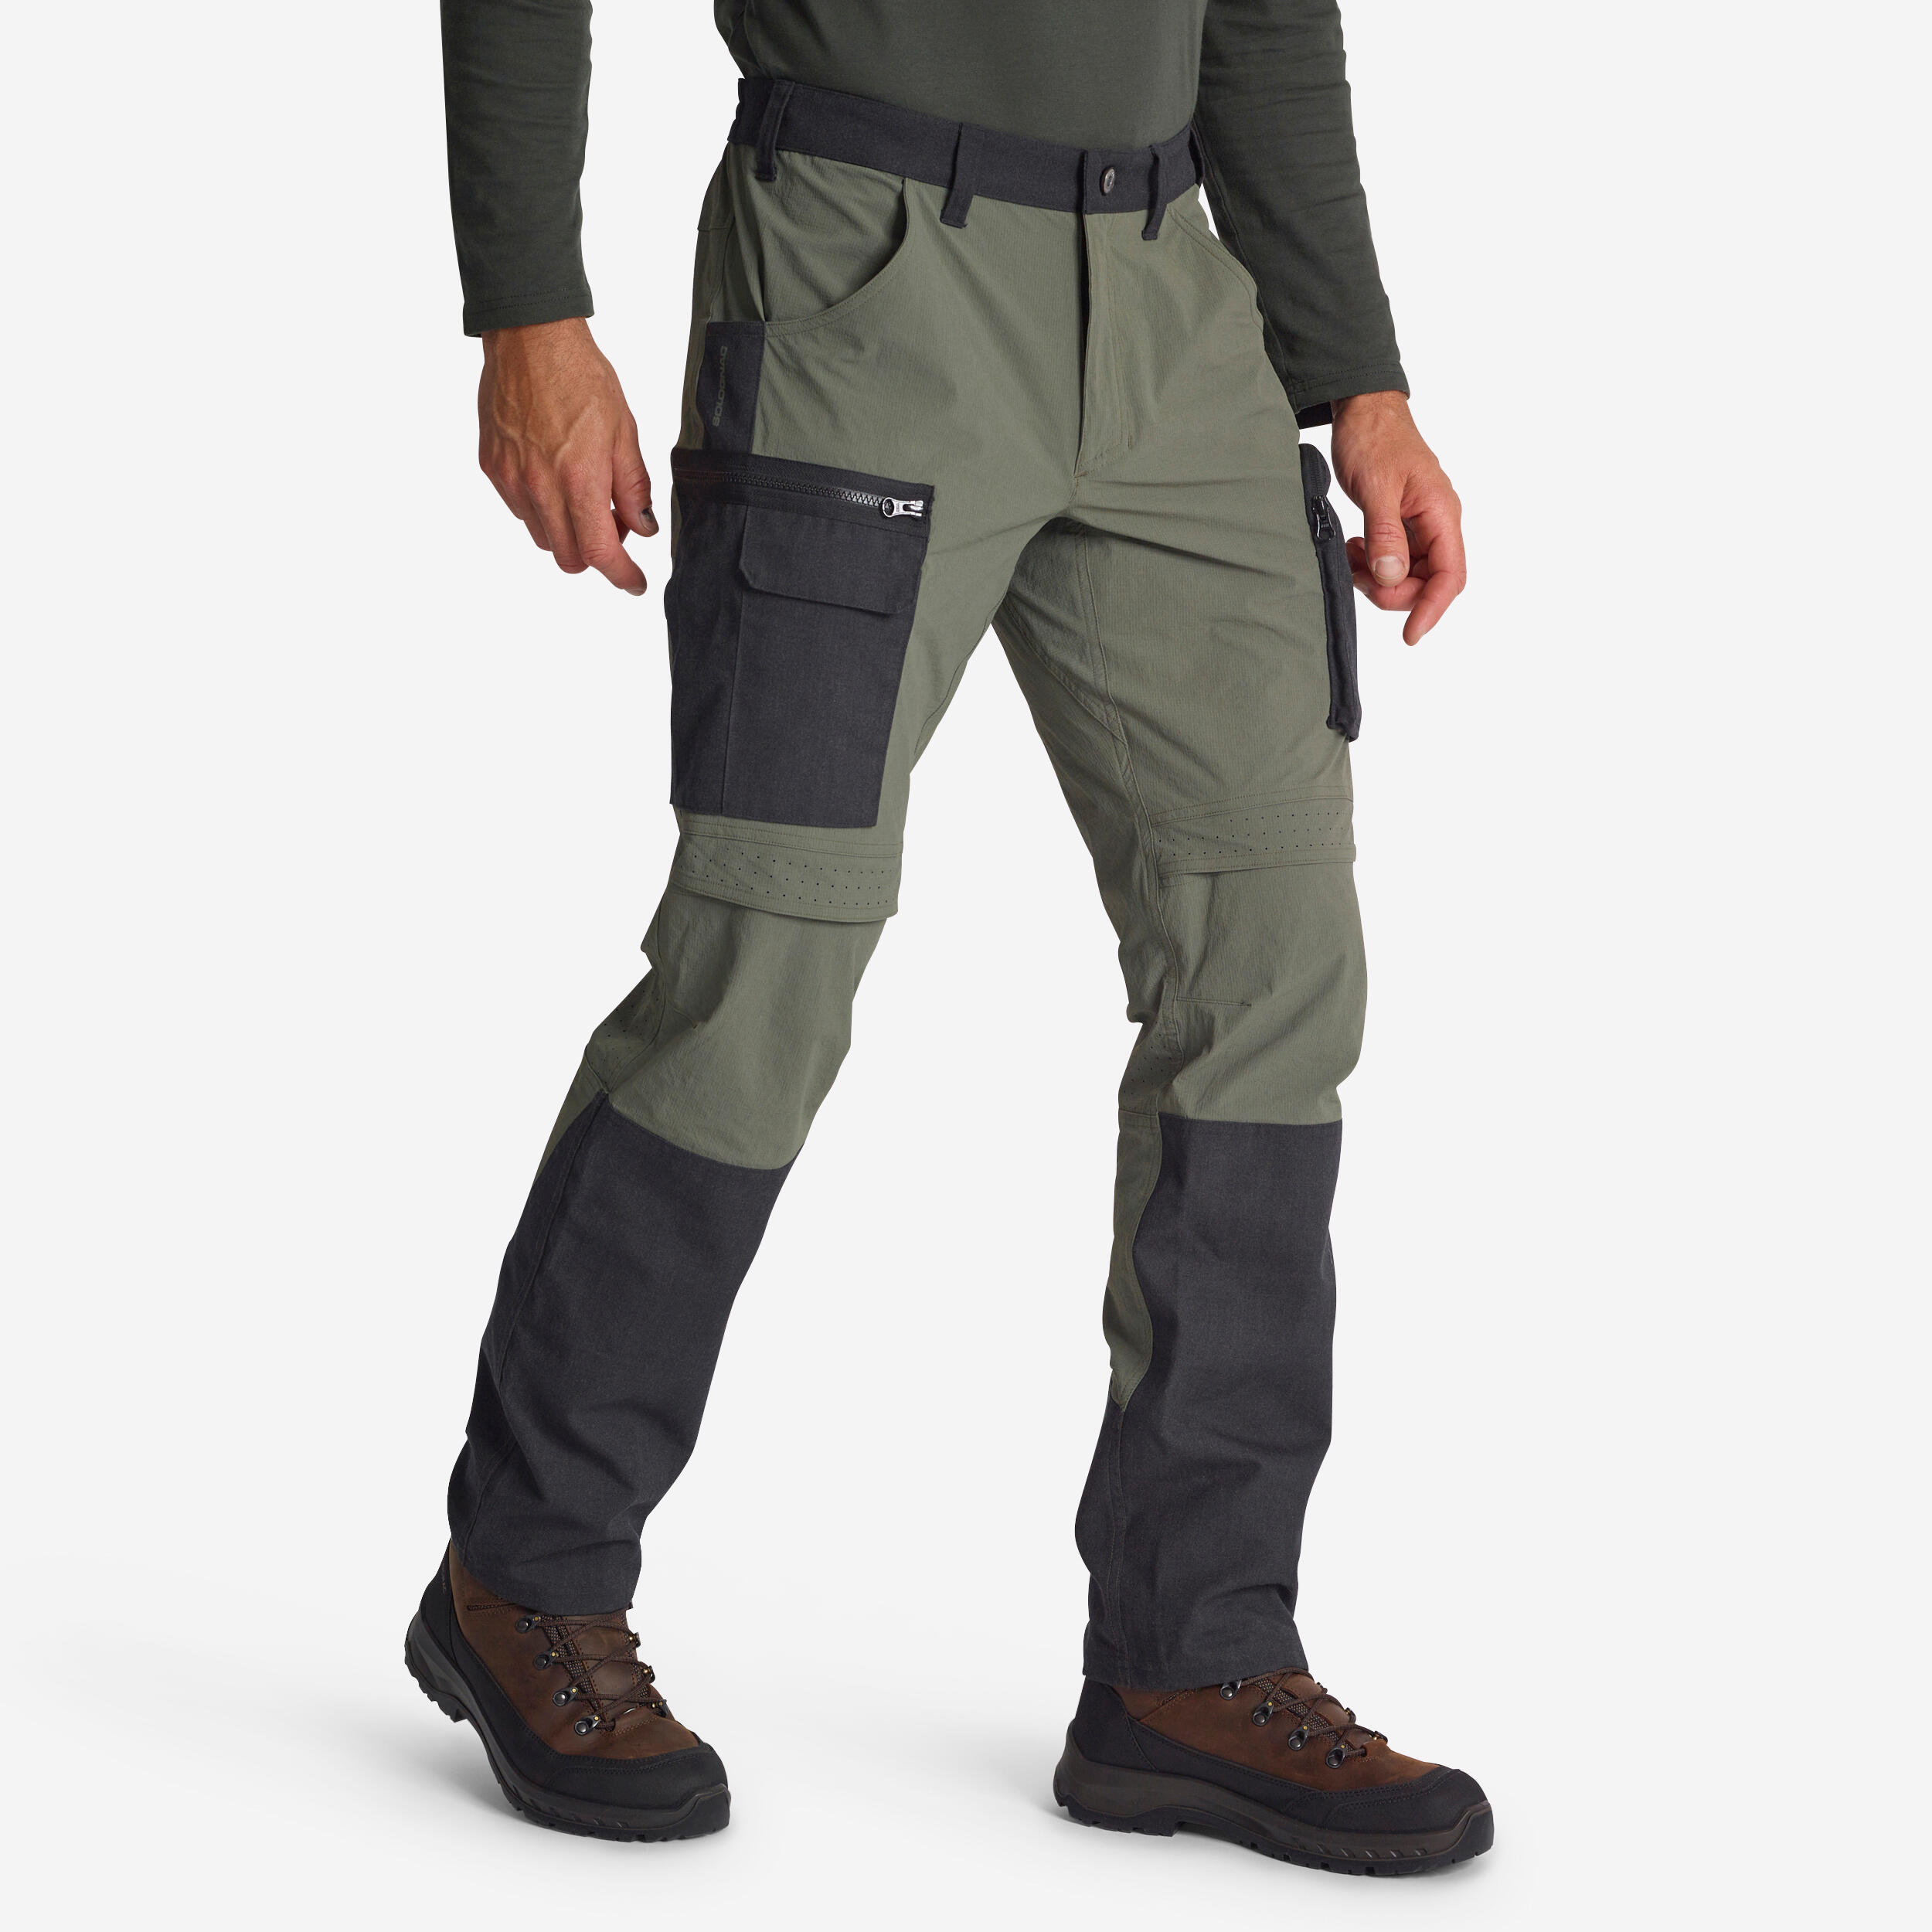 Mens Breathable Trousers Pants SG520 Green